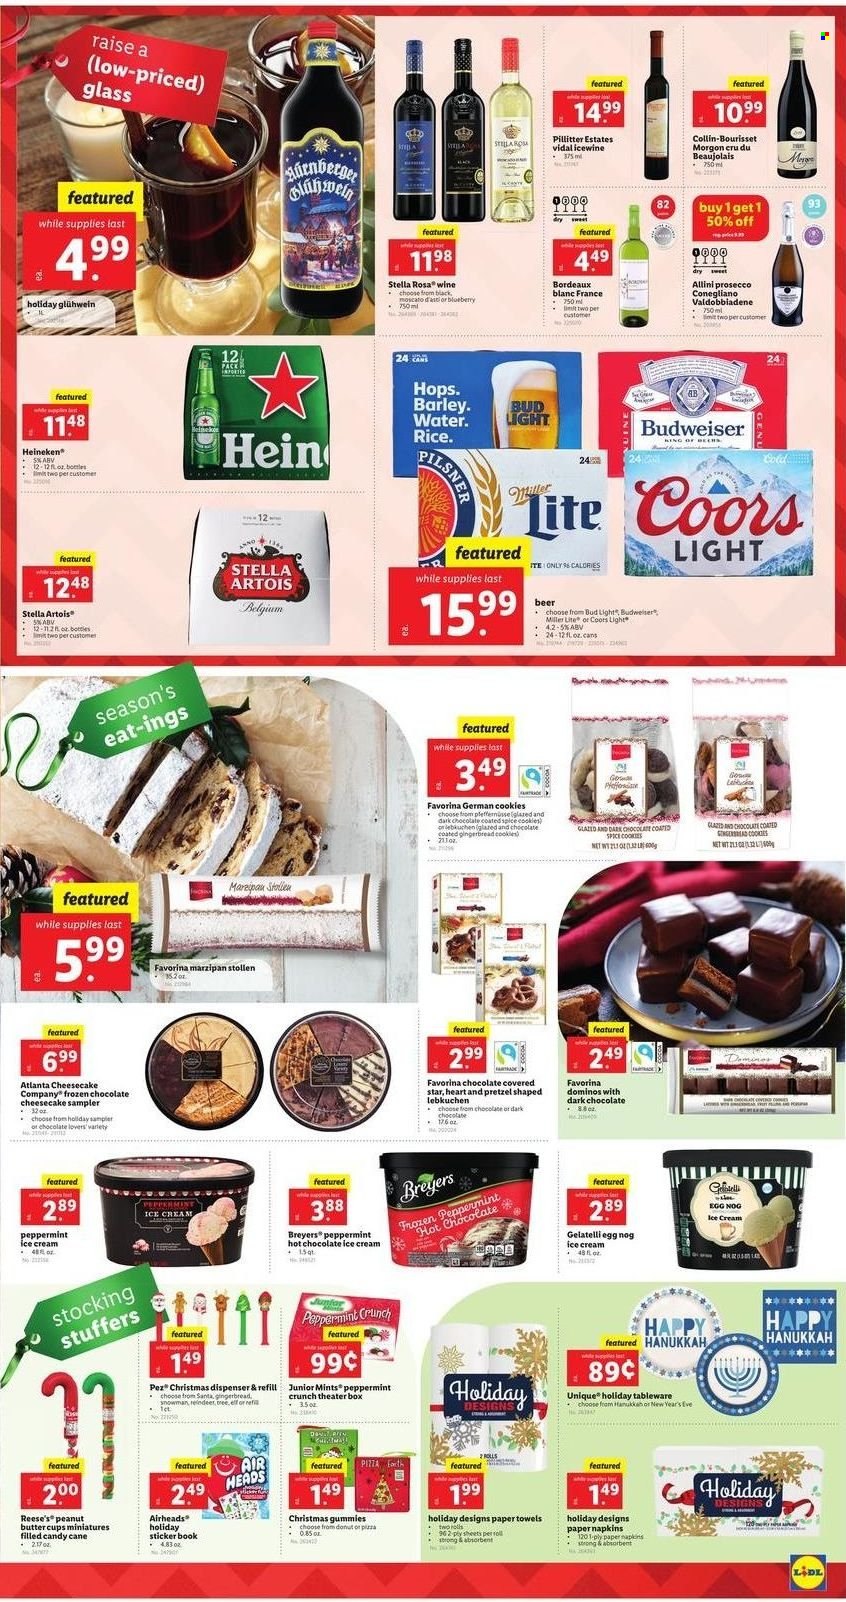 thumbnail - Lidl Flyer - 11/17/2021 - 11/24/2021 - Sales products - pretzels, gingerbread, marzipan stollen, stollen, donut, eggs, ice cream, Reese's, cookies, german cookies, candy cane, AirHeads, Santa, dark chocolate, peanut butter cups, spice, hot chocolate, prosecco, wine, Moscato, beer, Bud Light, Heineken, napkins, kitchen towels, paper towels, dispenser, tableware, sticker, book, Elf, Budweiser, Miller Lite, Stella Artois, Coors. Page 3.